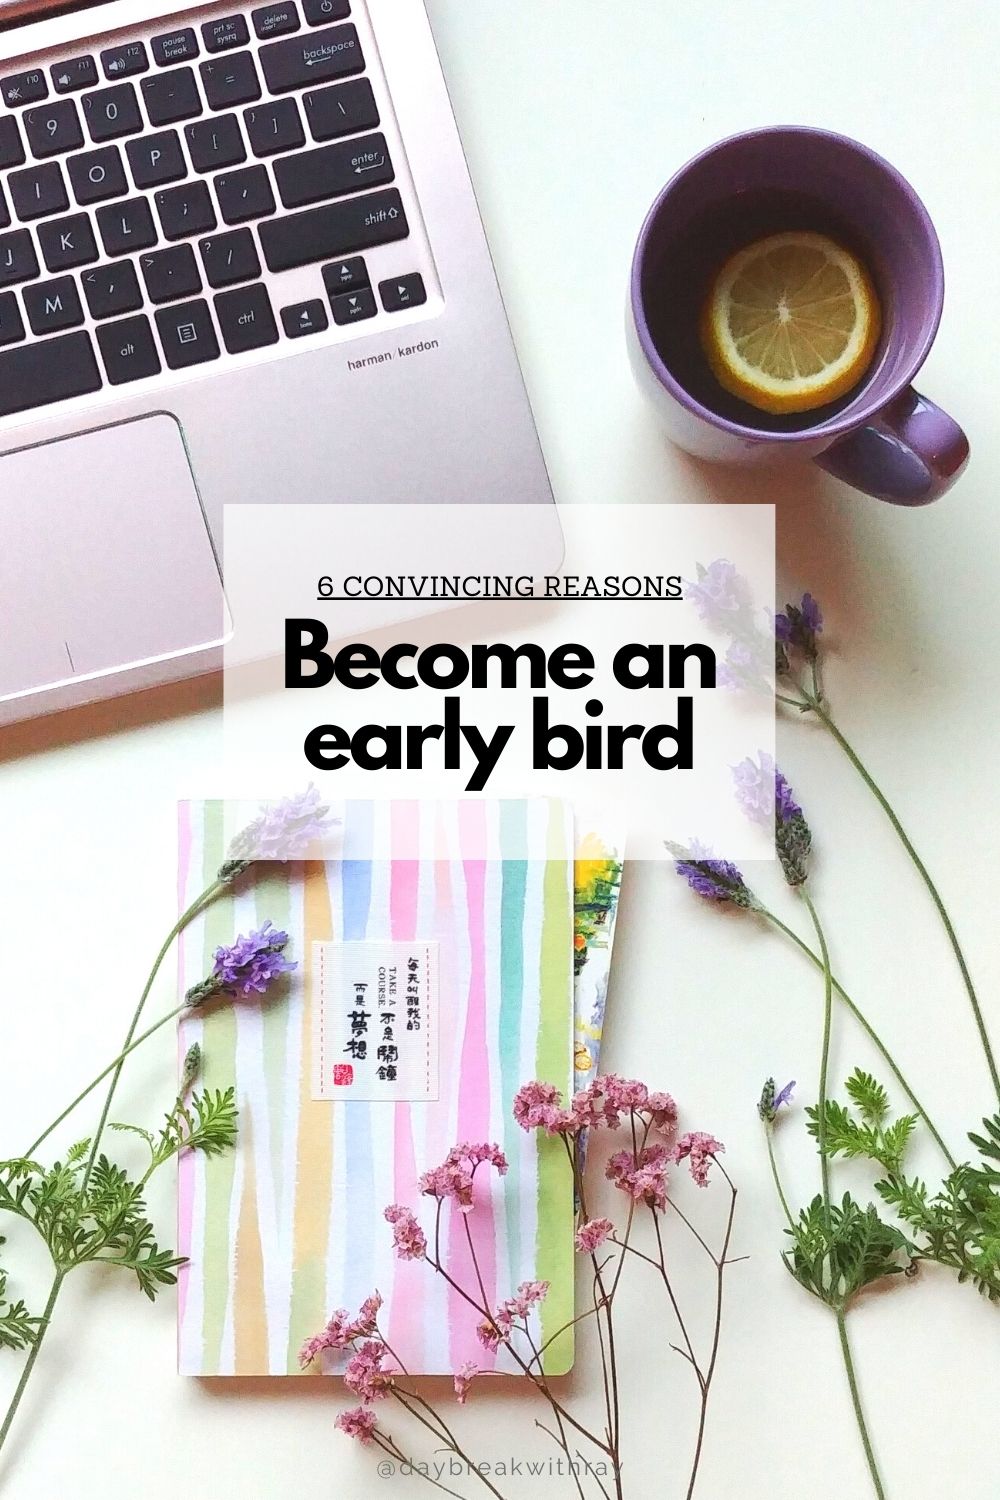 6 Convincing Reasons to Become an Early Bird